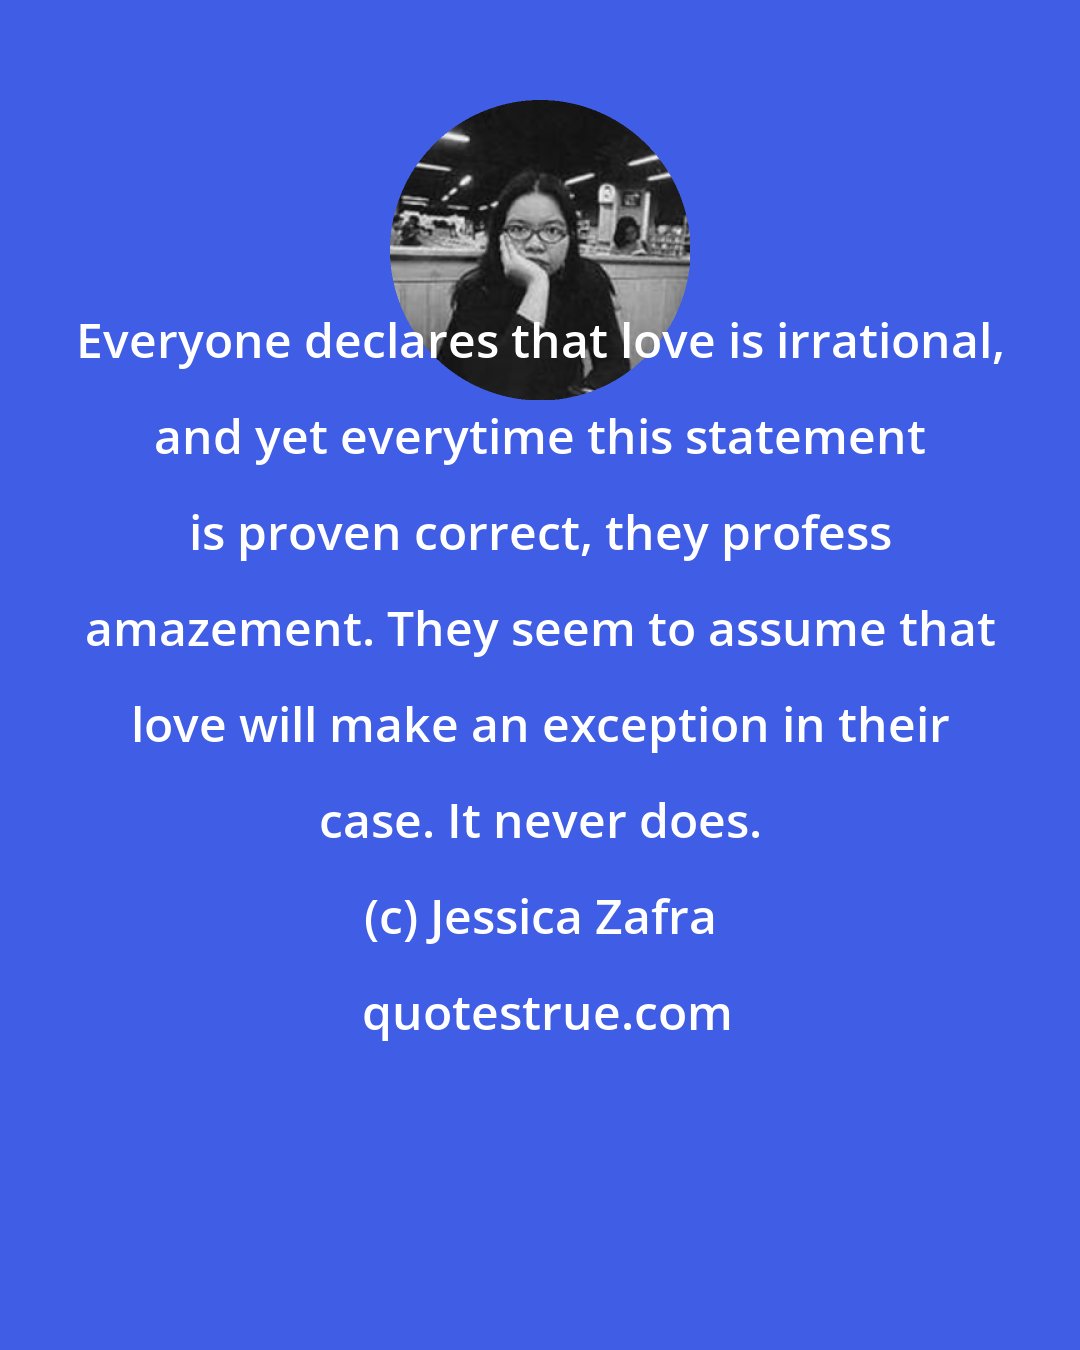 Jessica Zafra: Everyone declares that love is irrational, and yet everytime this statement is proven correct, they profess amazement. They seem to assume that love will make an exception in their case. It never does.